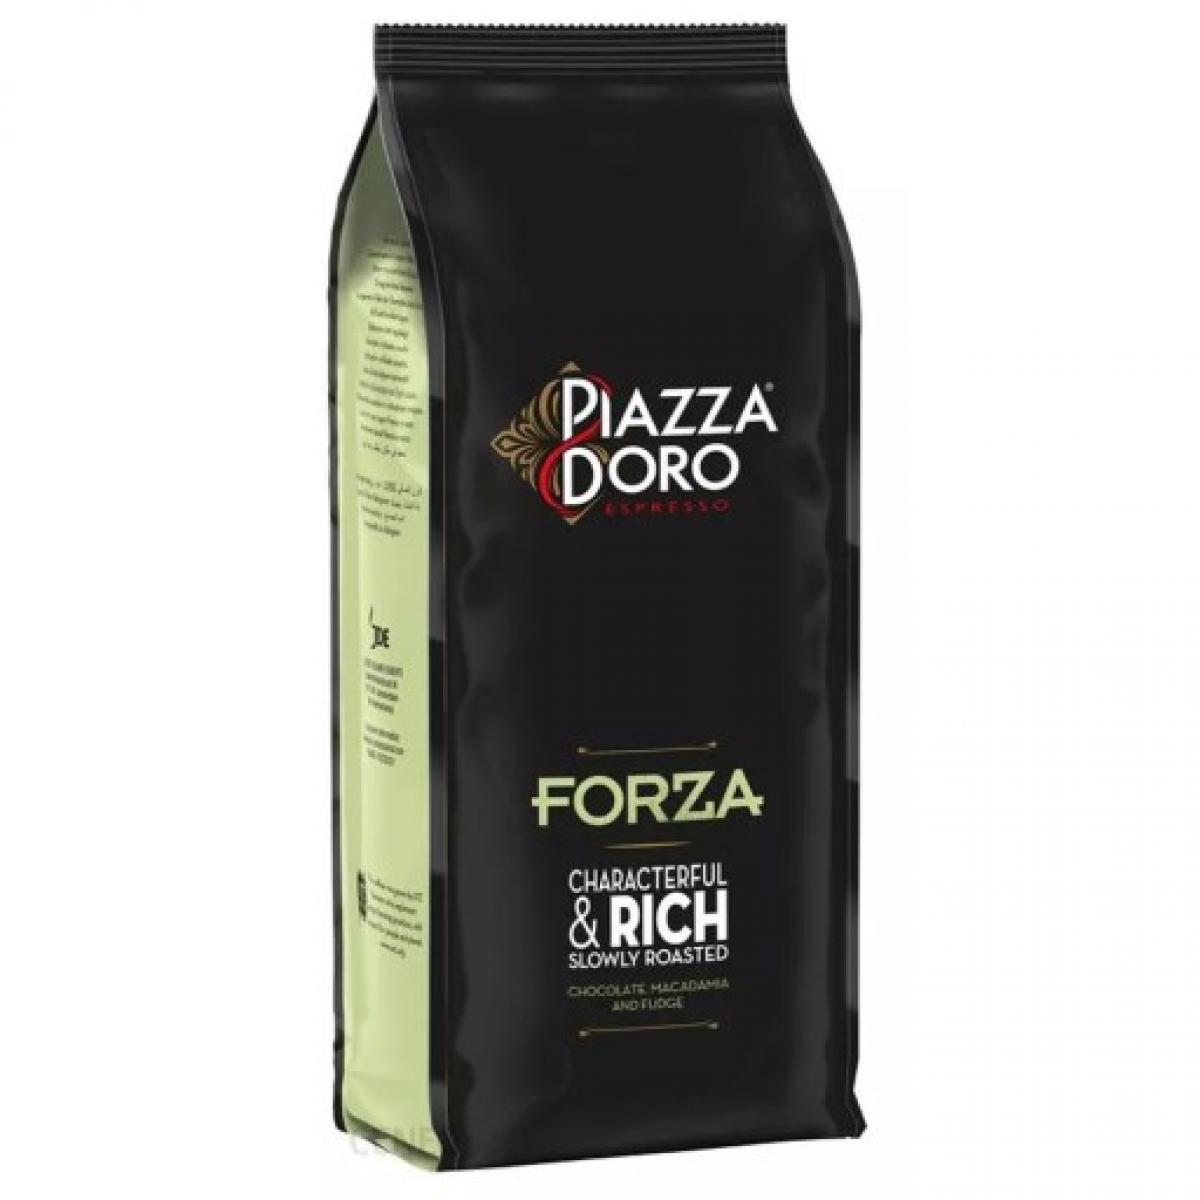 Piazza d'Oro Forza Espresso Coffee Beans 1kg RRP 14.99 CLEARANCE XL 5